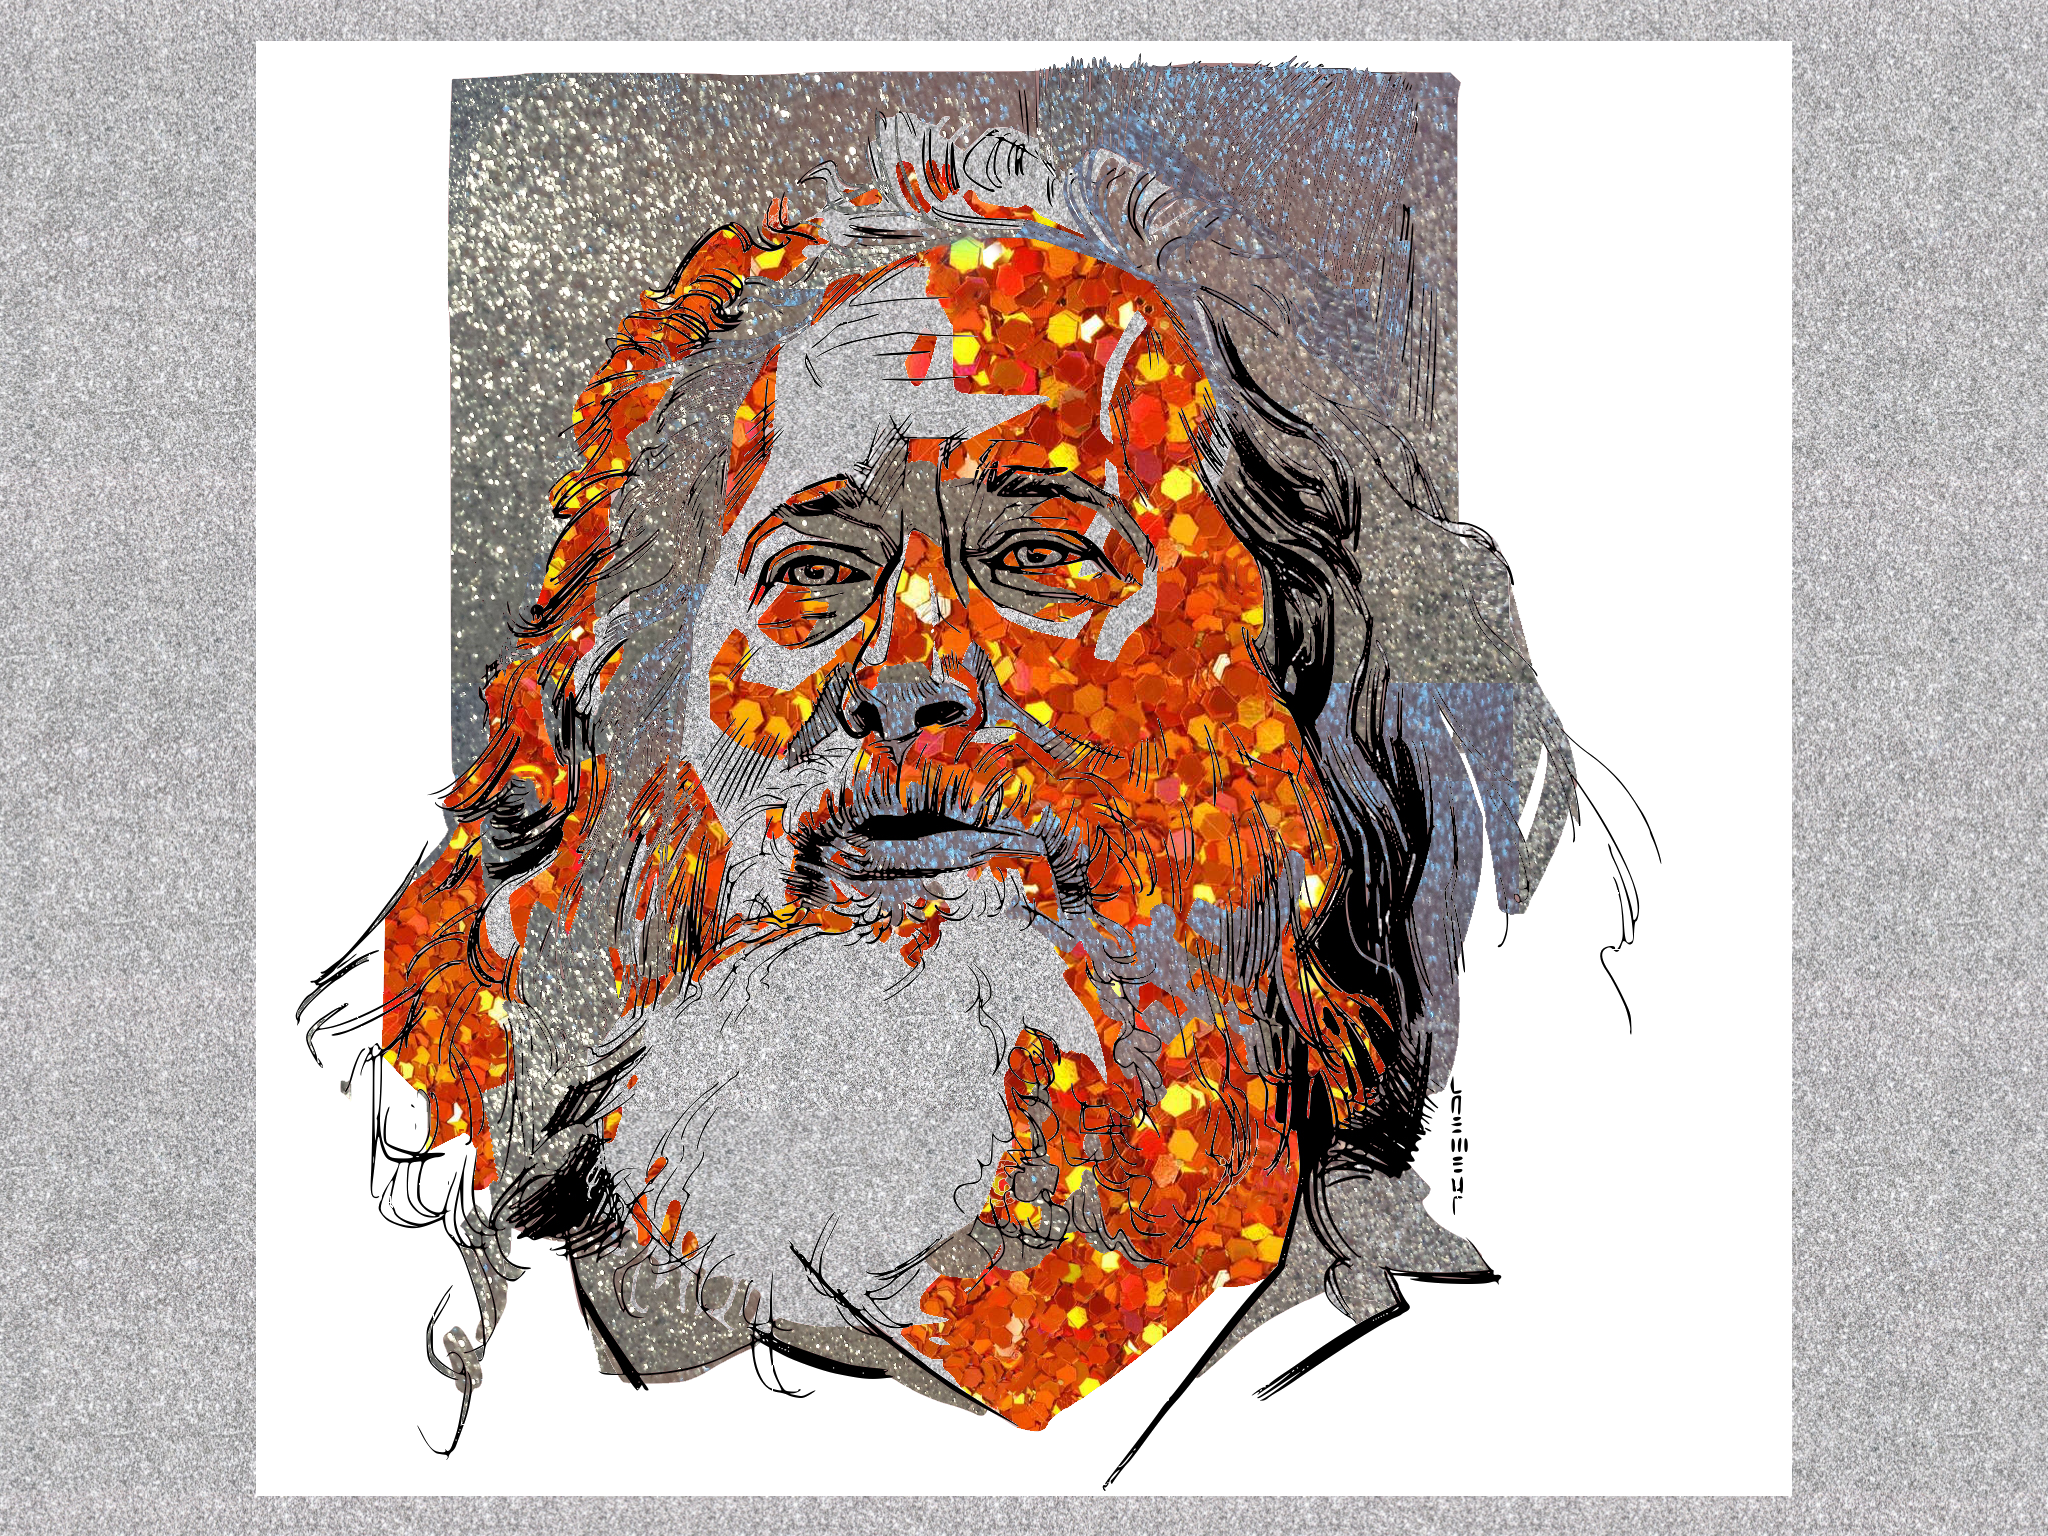 Portrait of Richard M. Stallman (RMS), founder of the Free and Open Source Software movement, by LÆMEUR. Glitter styling done by Olivia A. Gallucci. After RMS' numerous controversies, I find it difficult to support him now. However, at the time I wrote this essay, I was inspired by him, which is why I chose to leave this image here. Used on a post about my Common App essay.